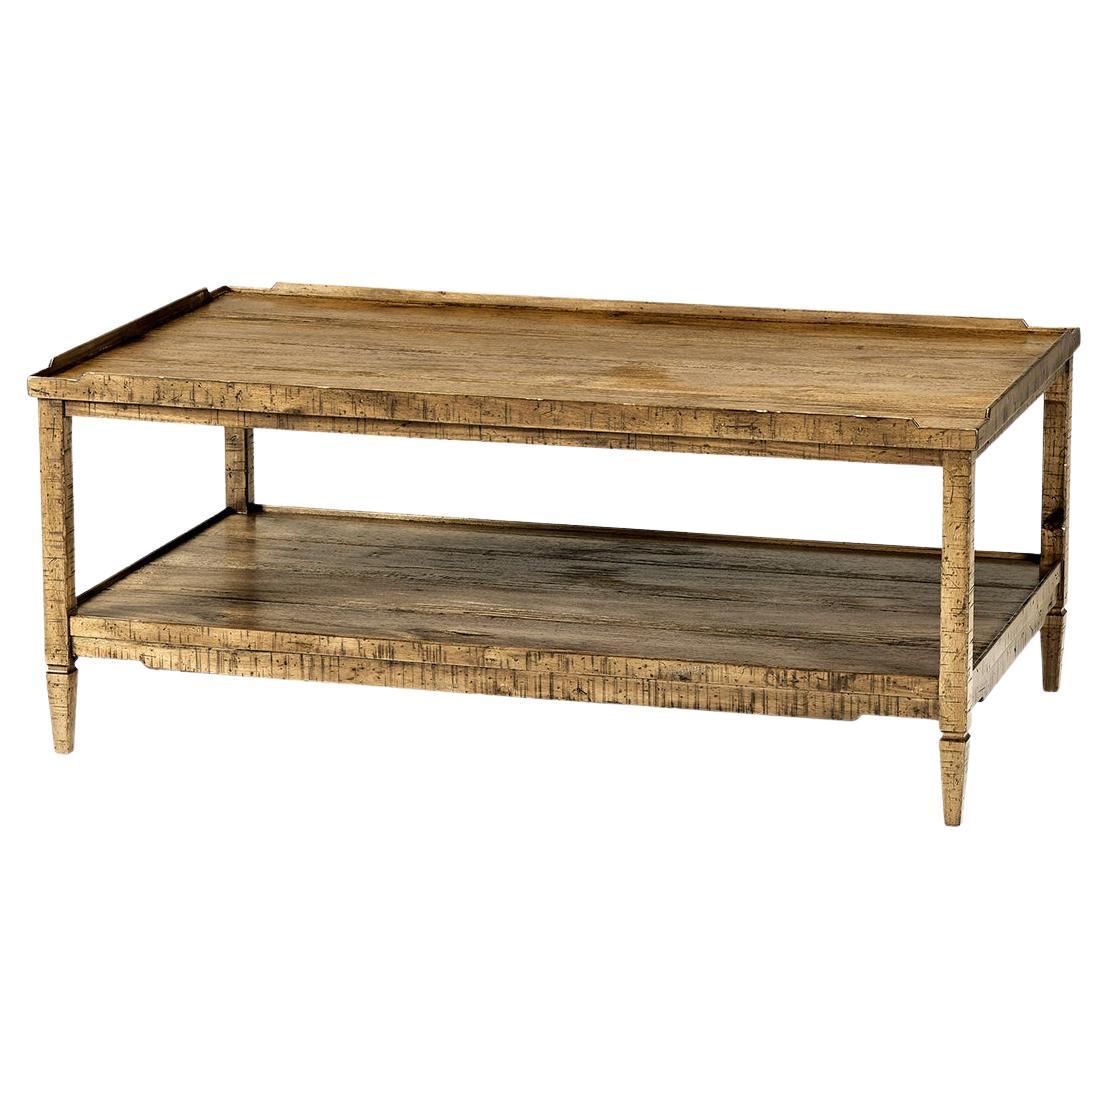 Rustic Country Coffee Table, Medium Drift For Sale